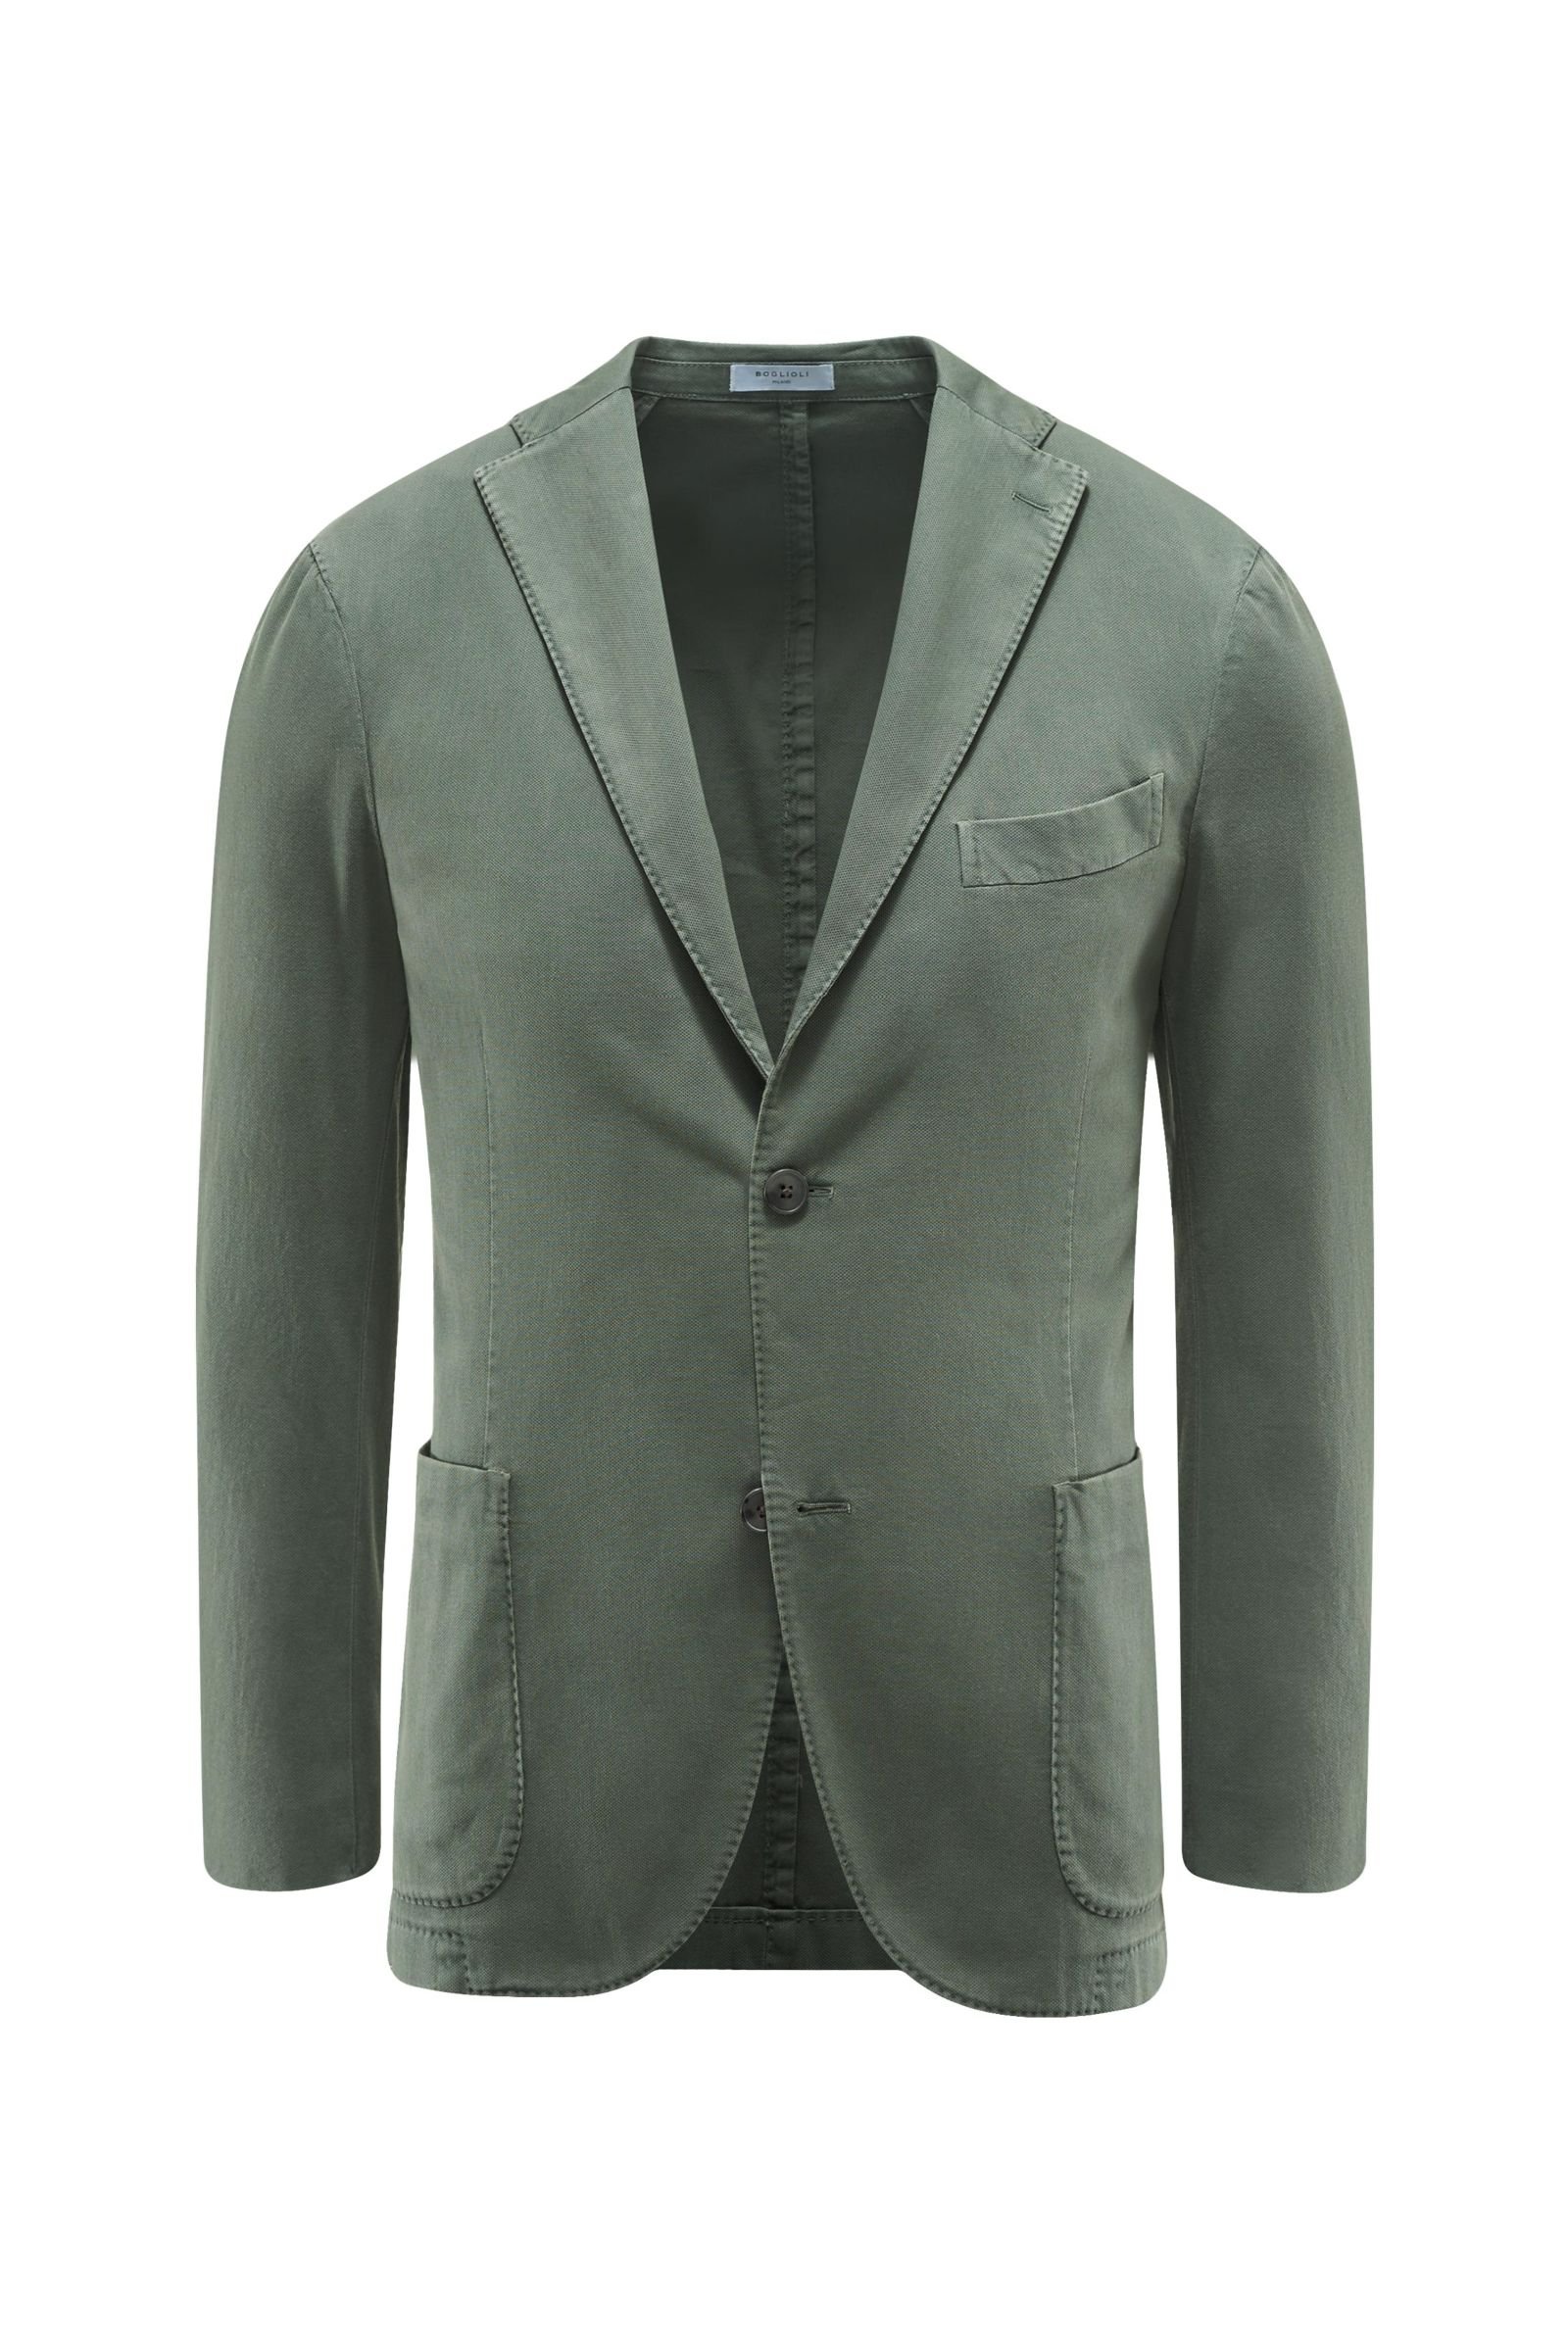 Smart-casual jacket pale green